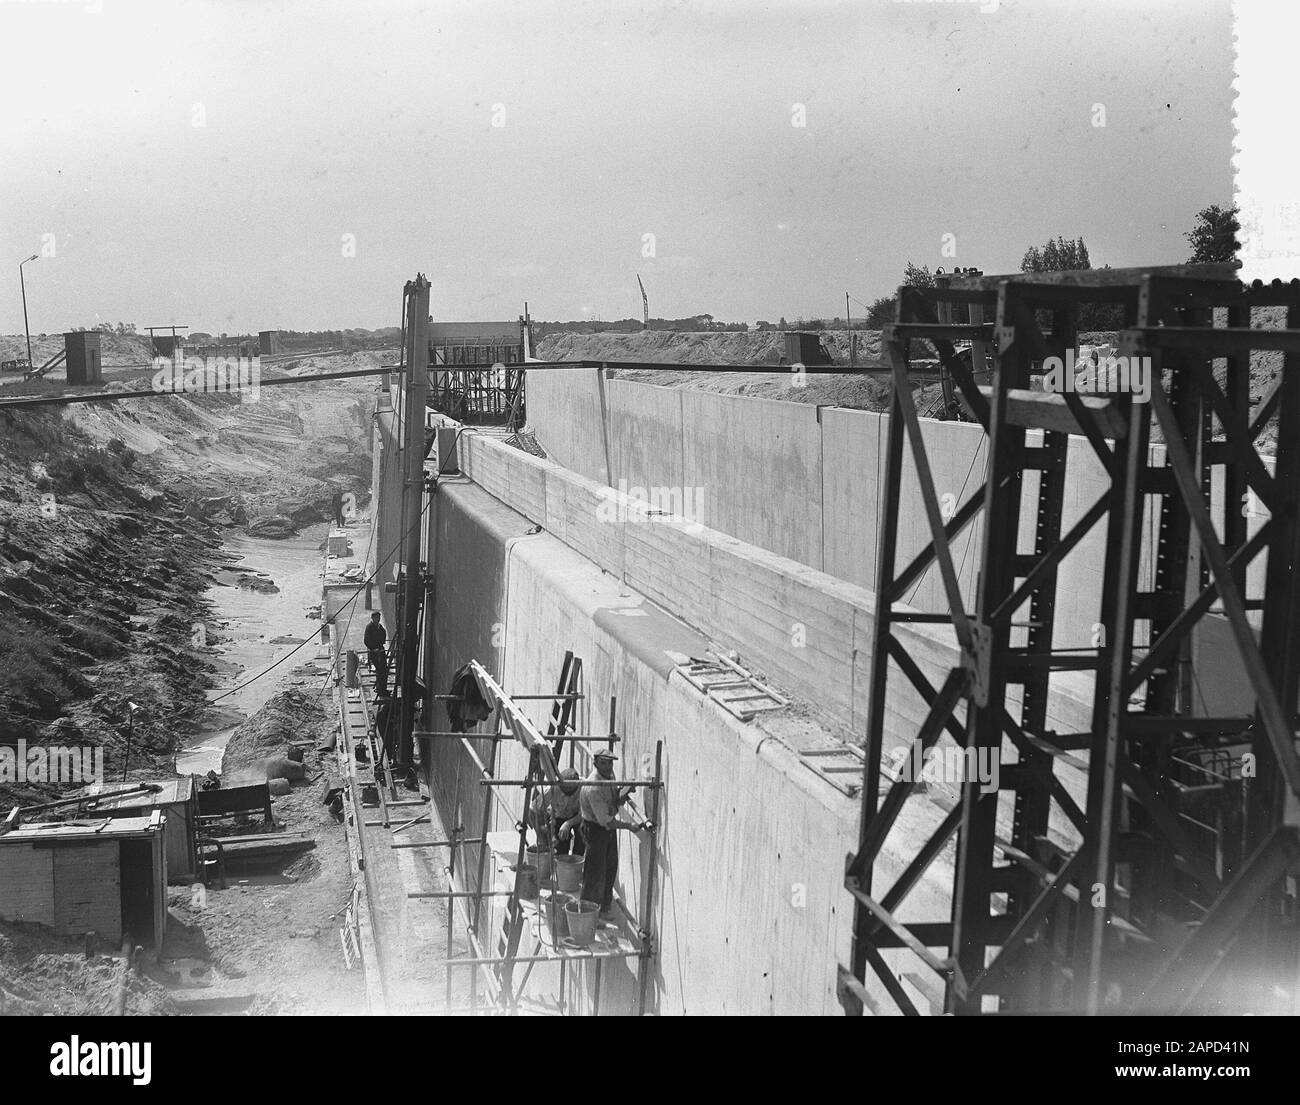 Construction Velser tunnel, tunnel exit with connection to railway Date: August 4, 1955 Keywords: RAILWAYS, TUNNERLINS Name: Velsertunnel Stock Photo